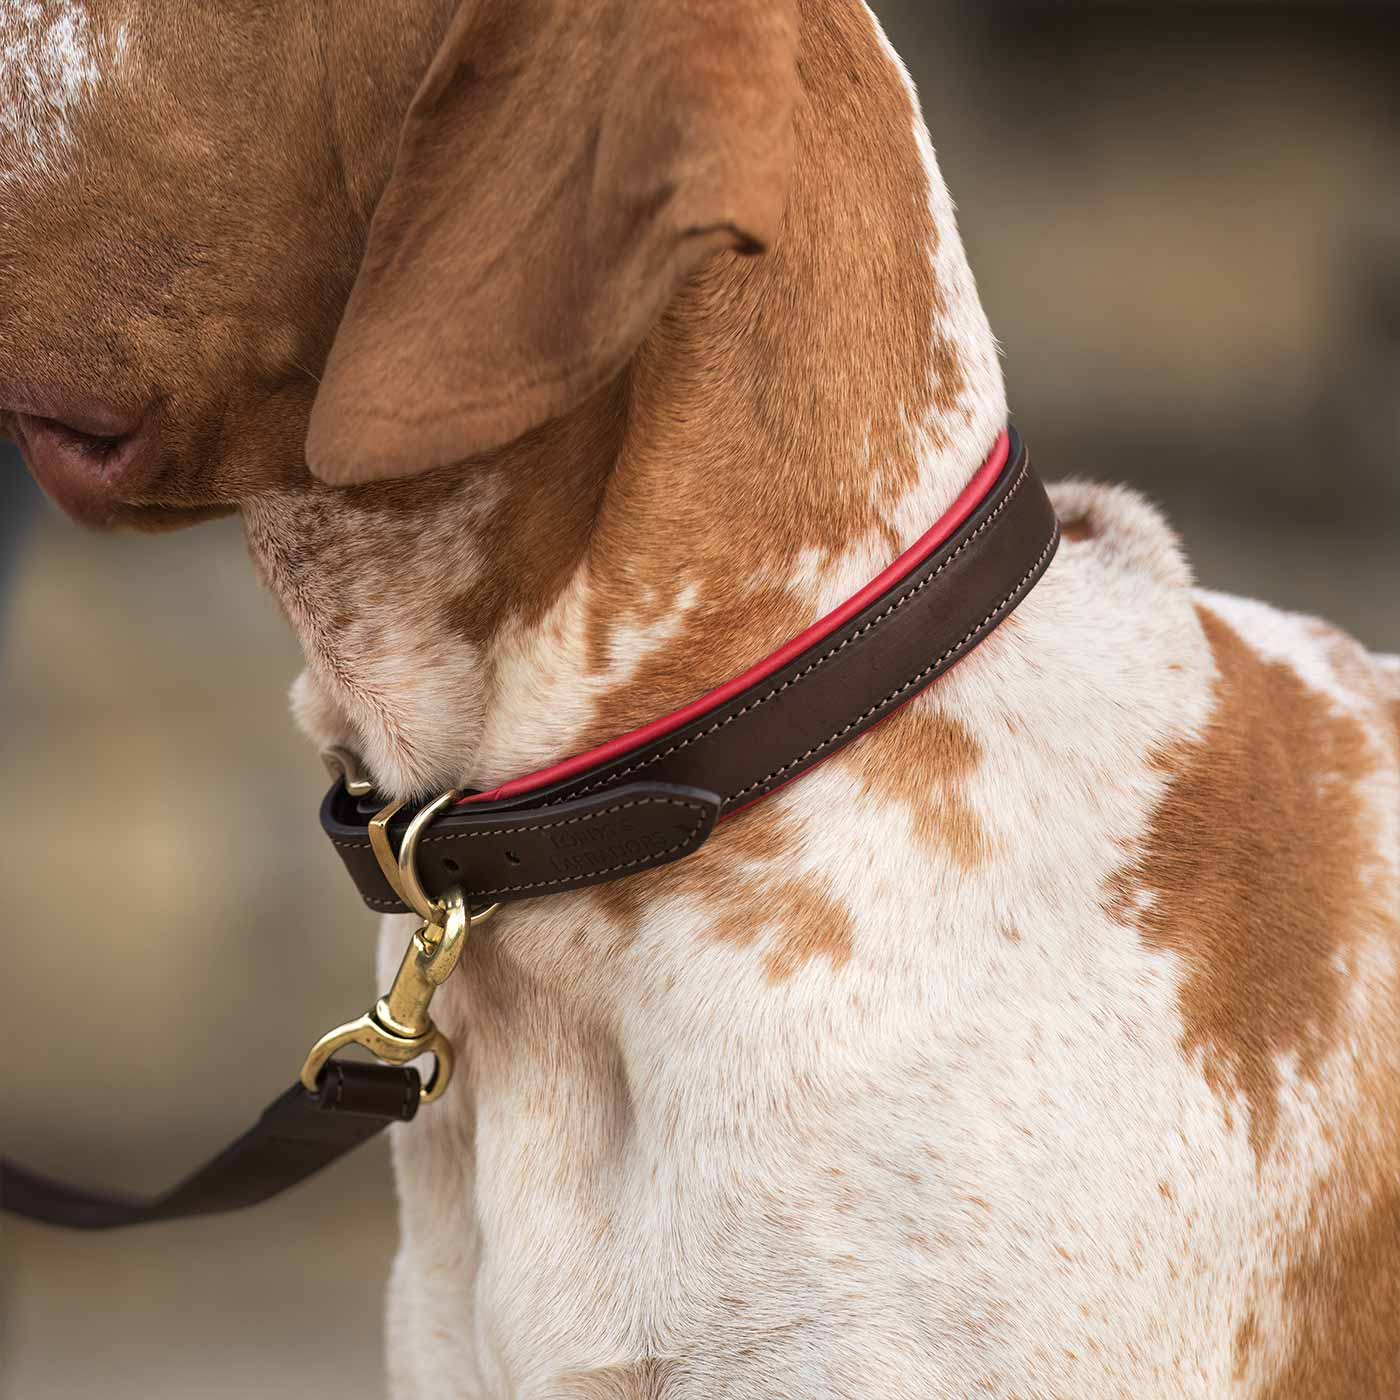 Discover dog walking luxury with our handcrafted Italian padded leather dog collar in Brown & Red! The perfect collar for dogs available now at Lords & Labradors 